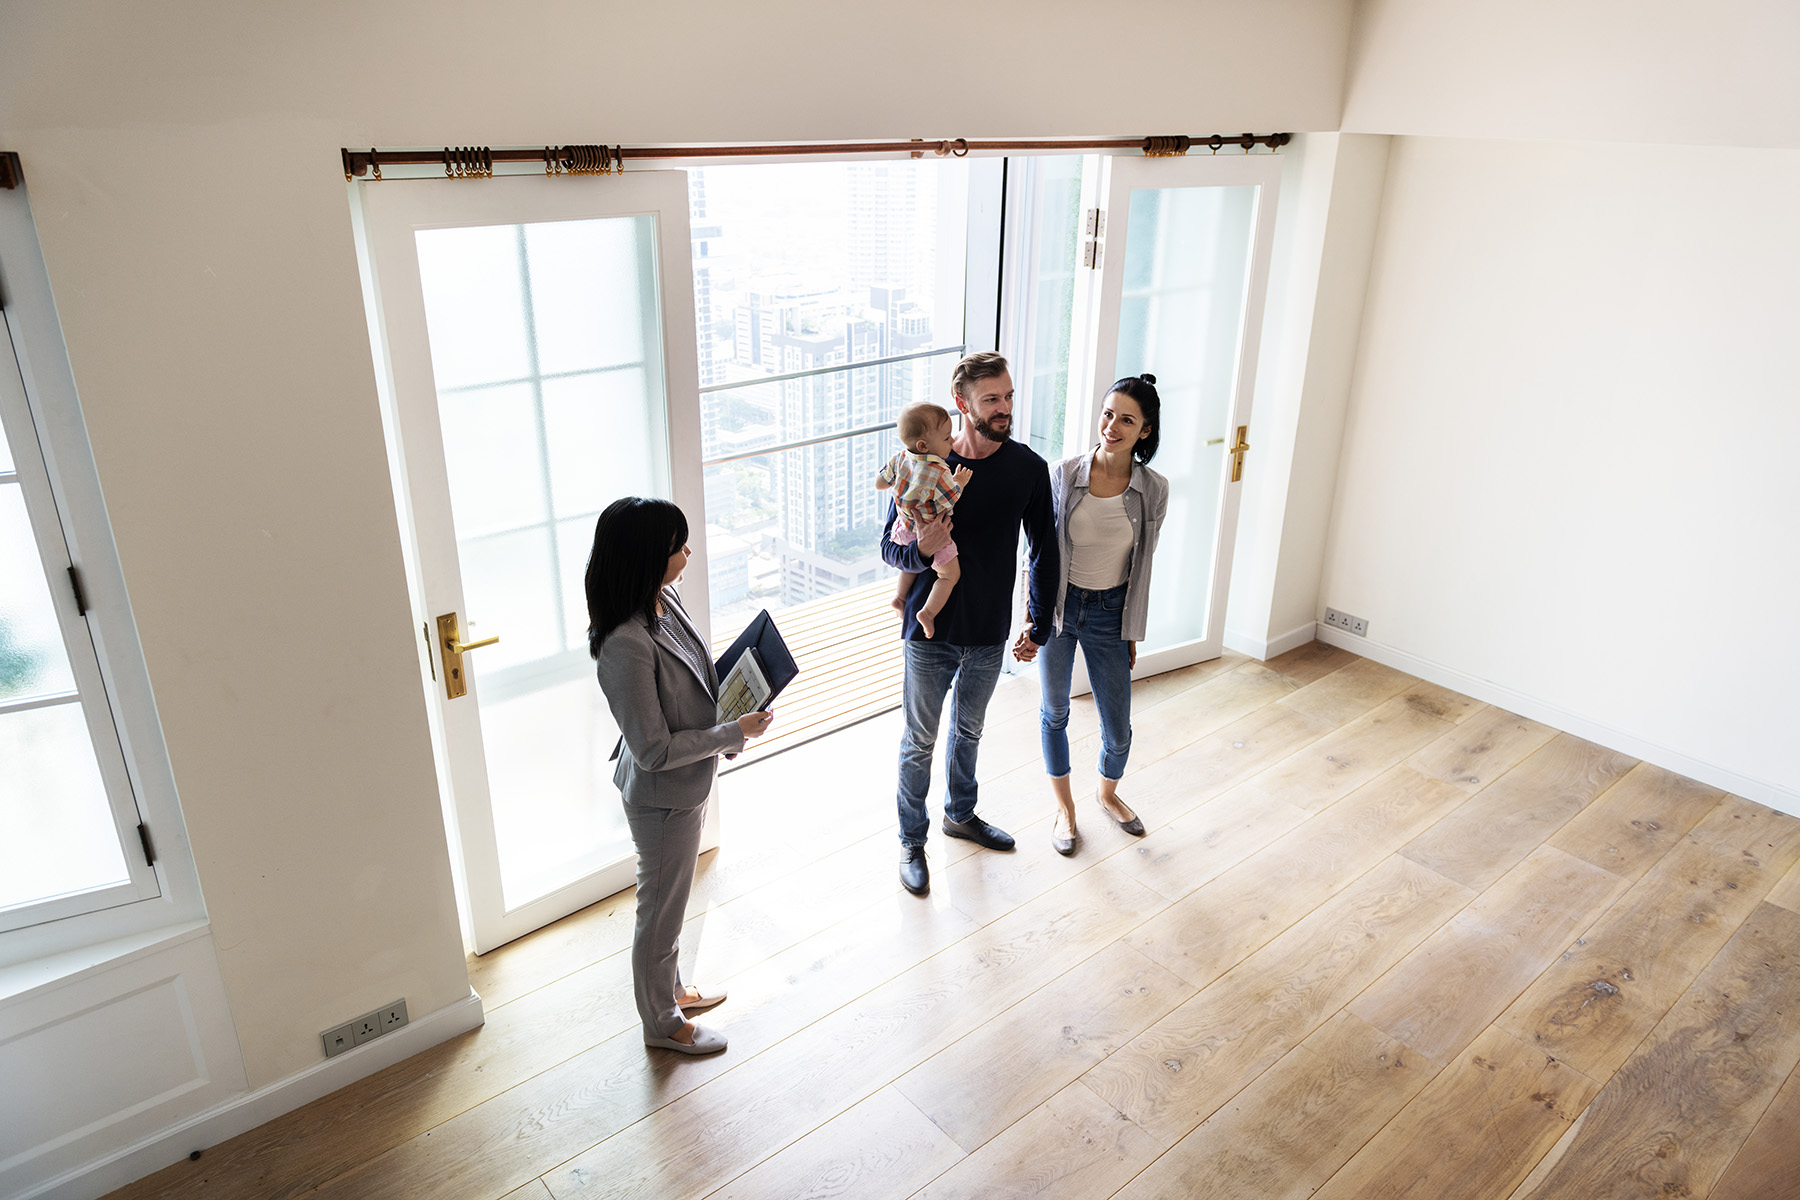 Young family looking at an empty flat, while a smiling realtor is standing close by.